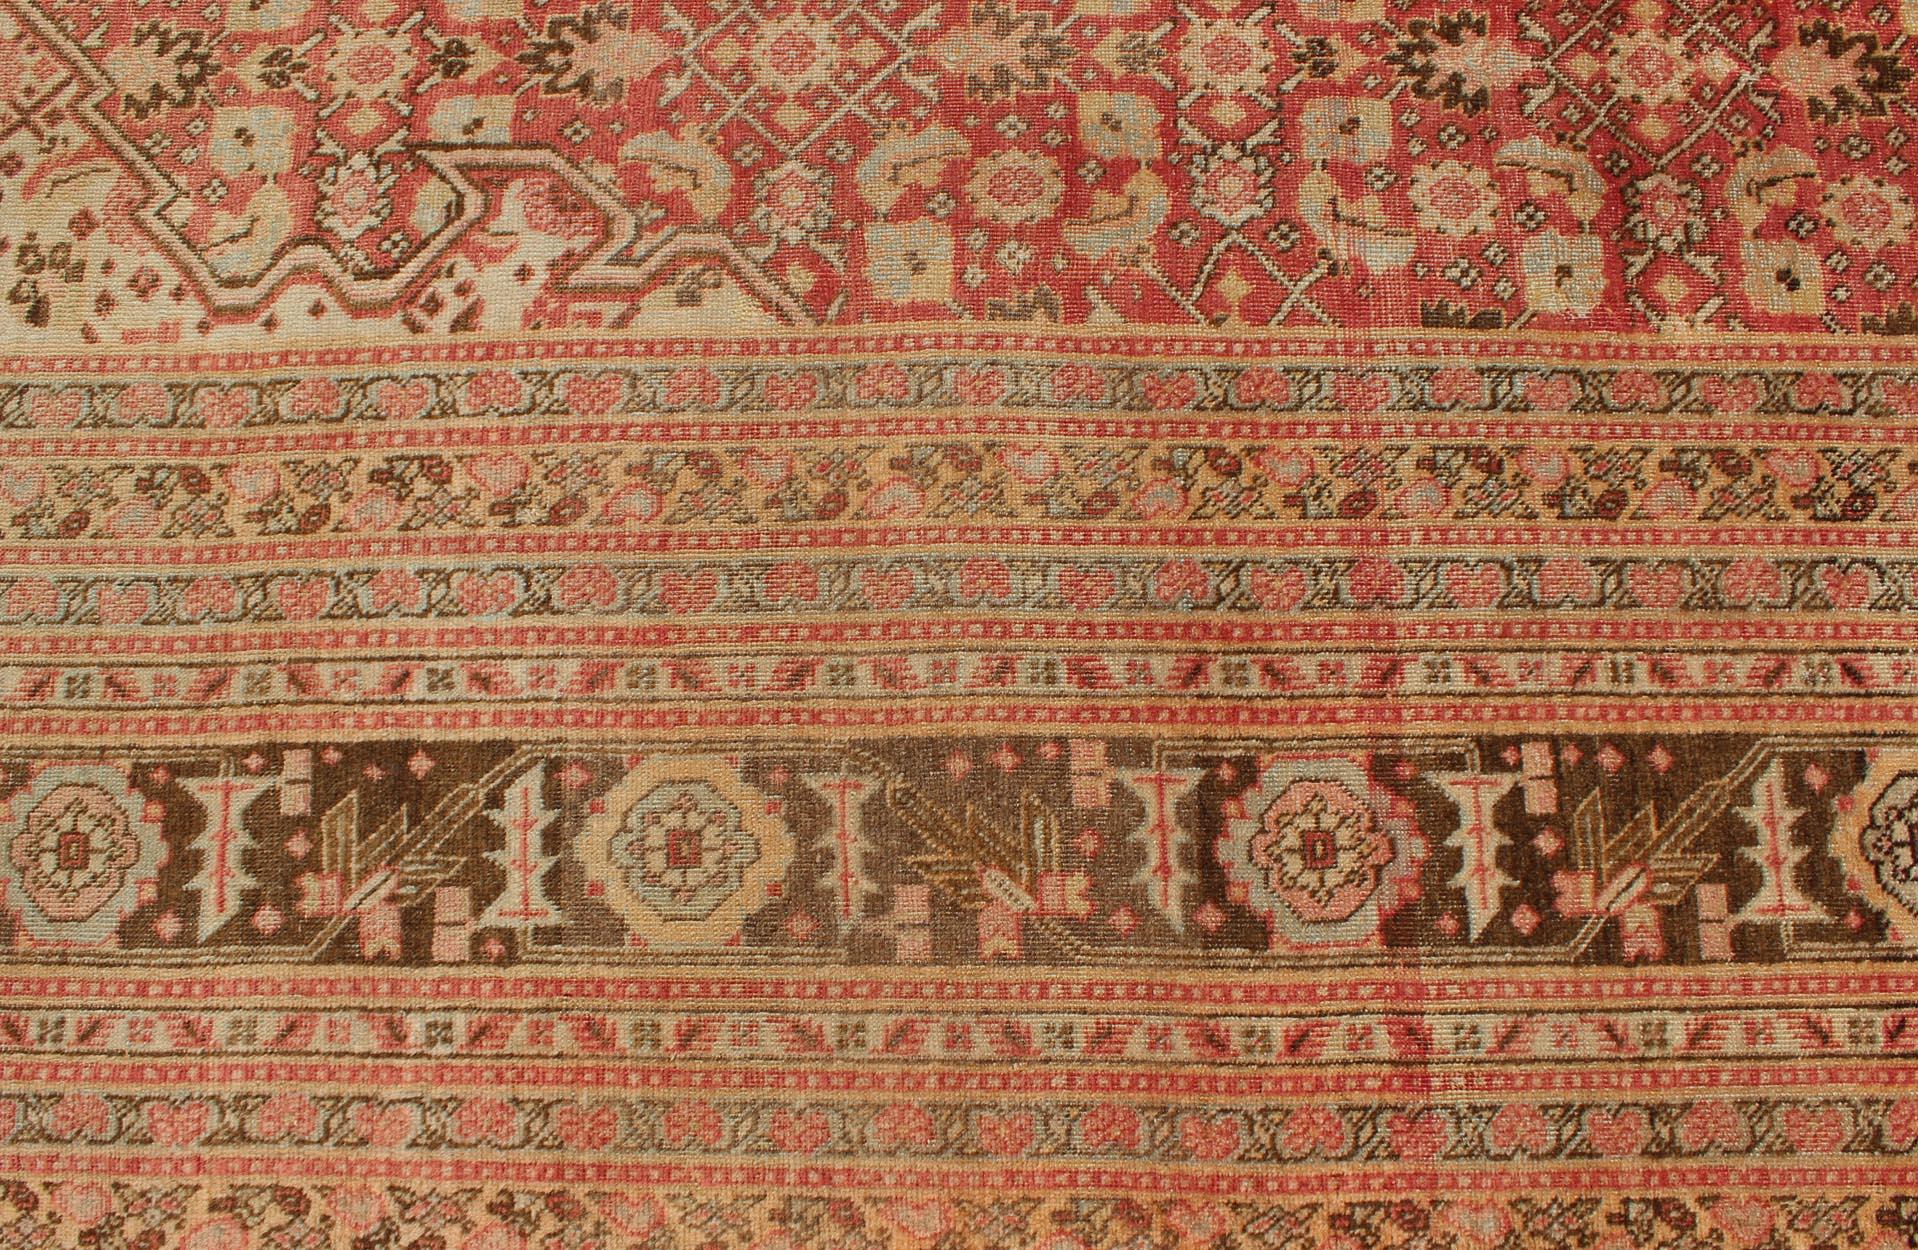 Antique Persian Tabriz Rug with Medallion Design in Coral, Cream and Brown Tones For Sale 1